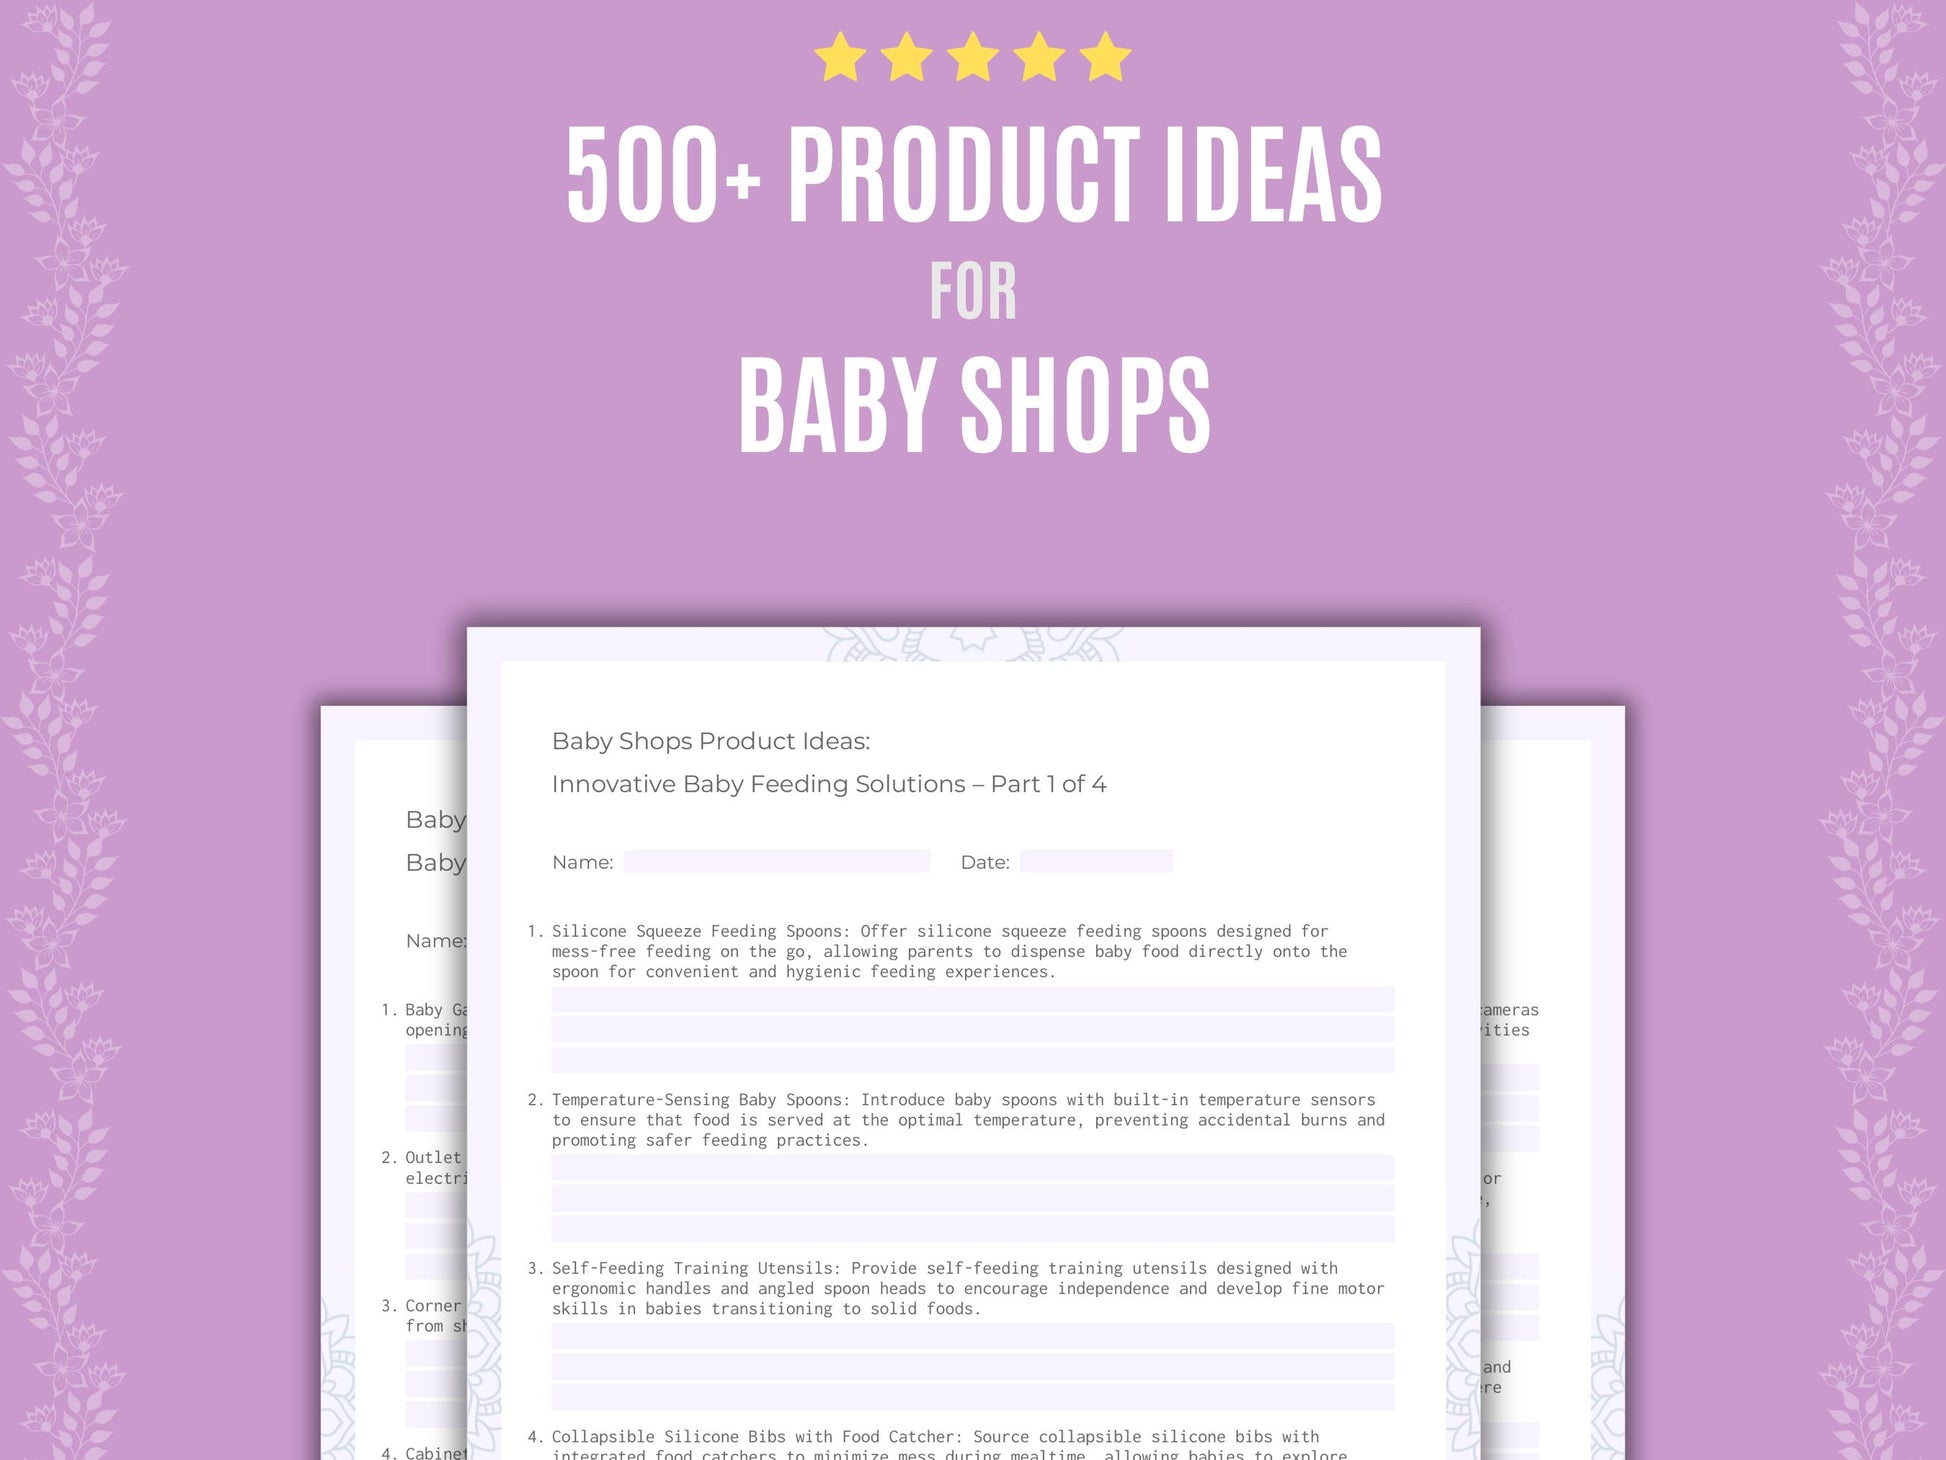 Baby Shops Product Ideas